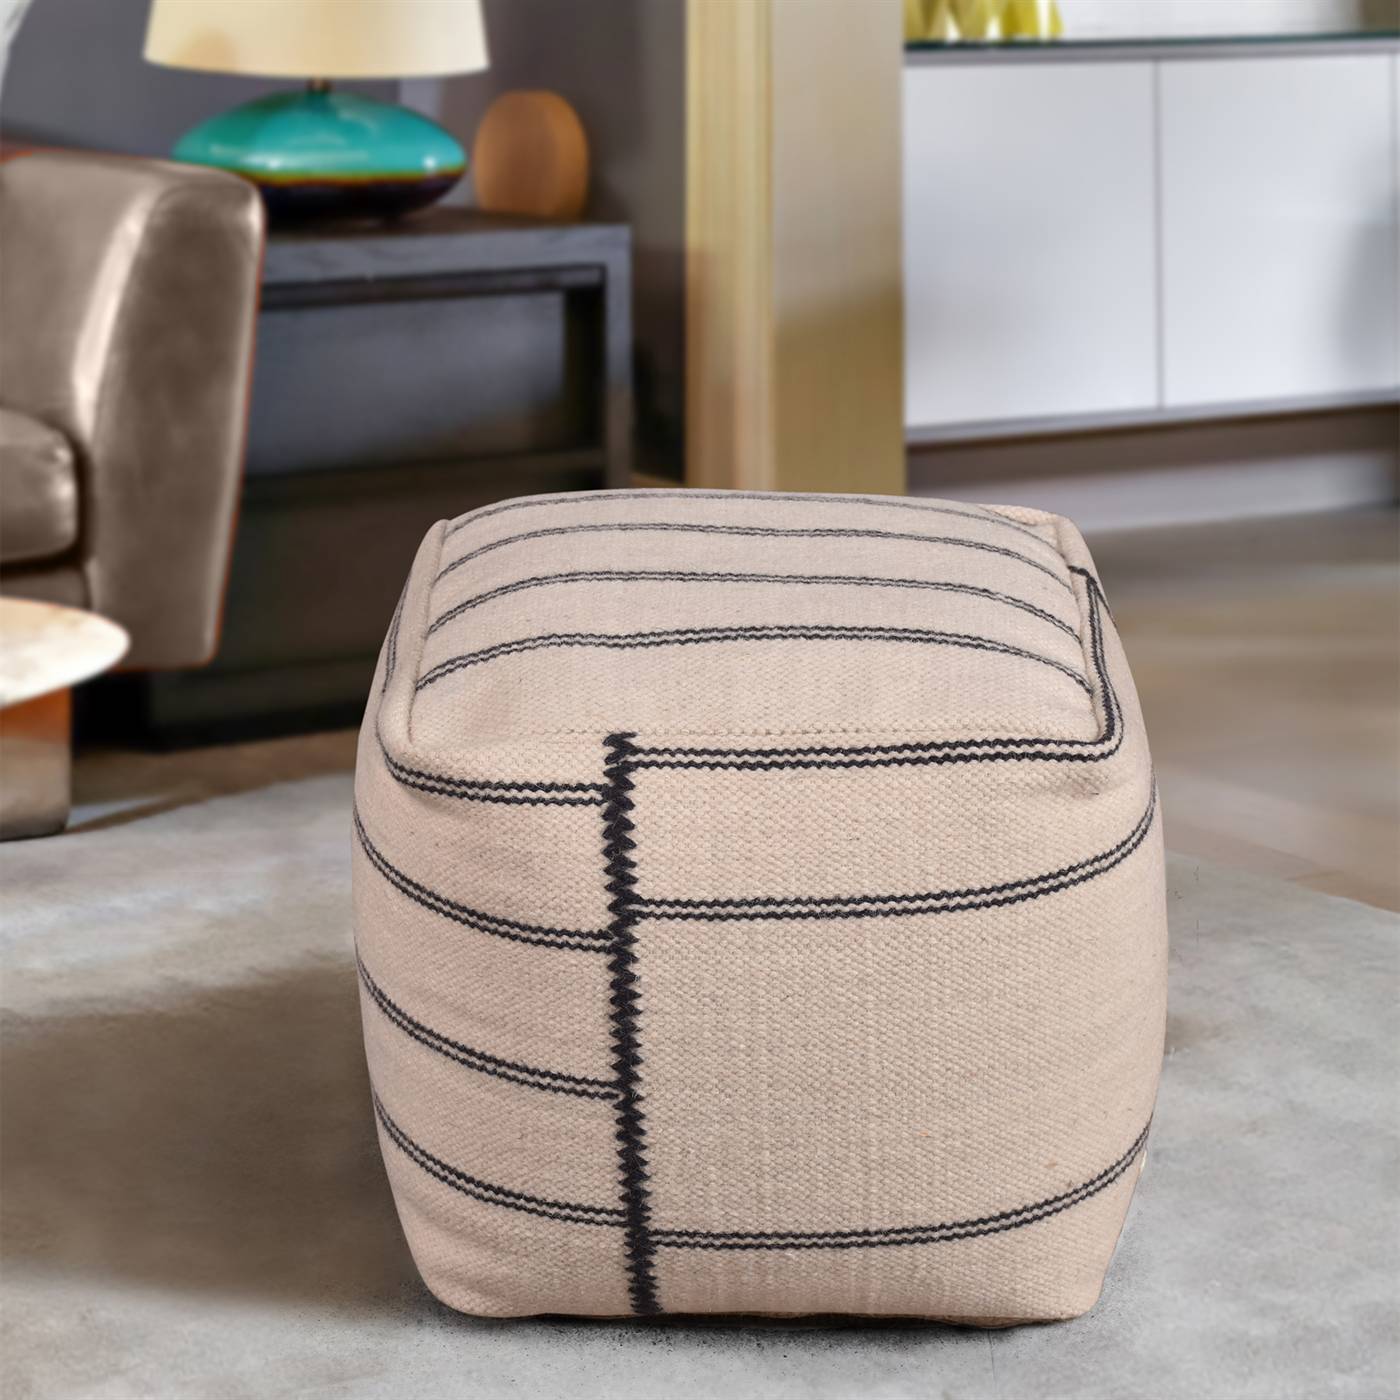 Barite Pouf, 40x40x40 cm, Natural White, Charcoal, Wool, Hand Woven, Pitloom, Flat Weave